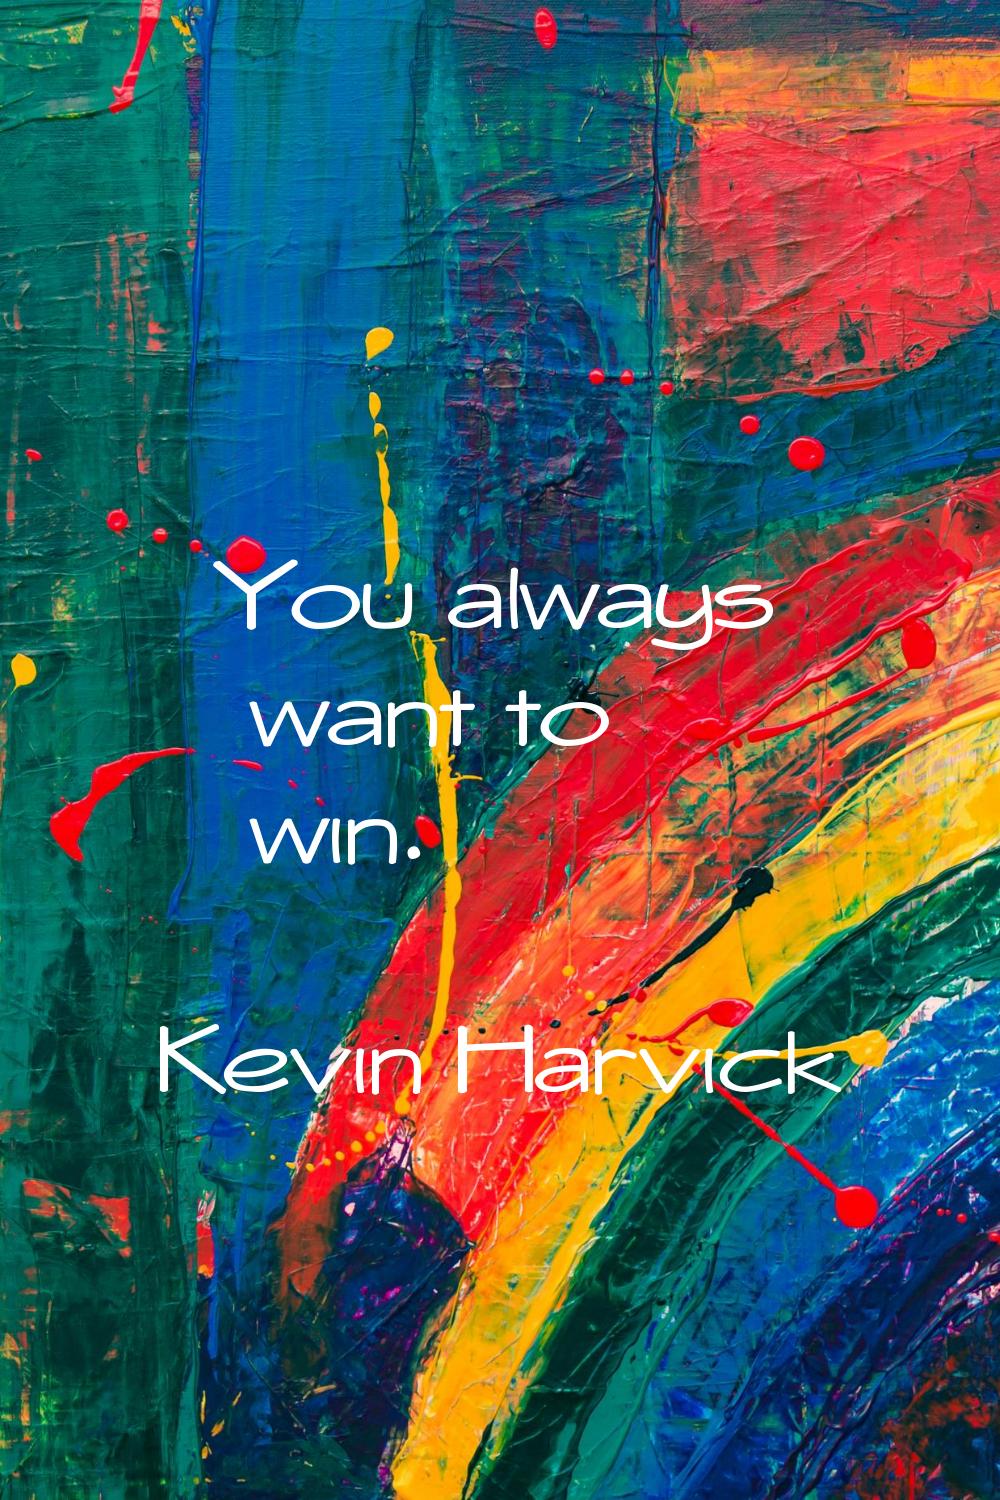 You always want to win.